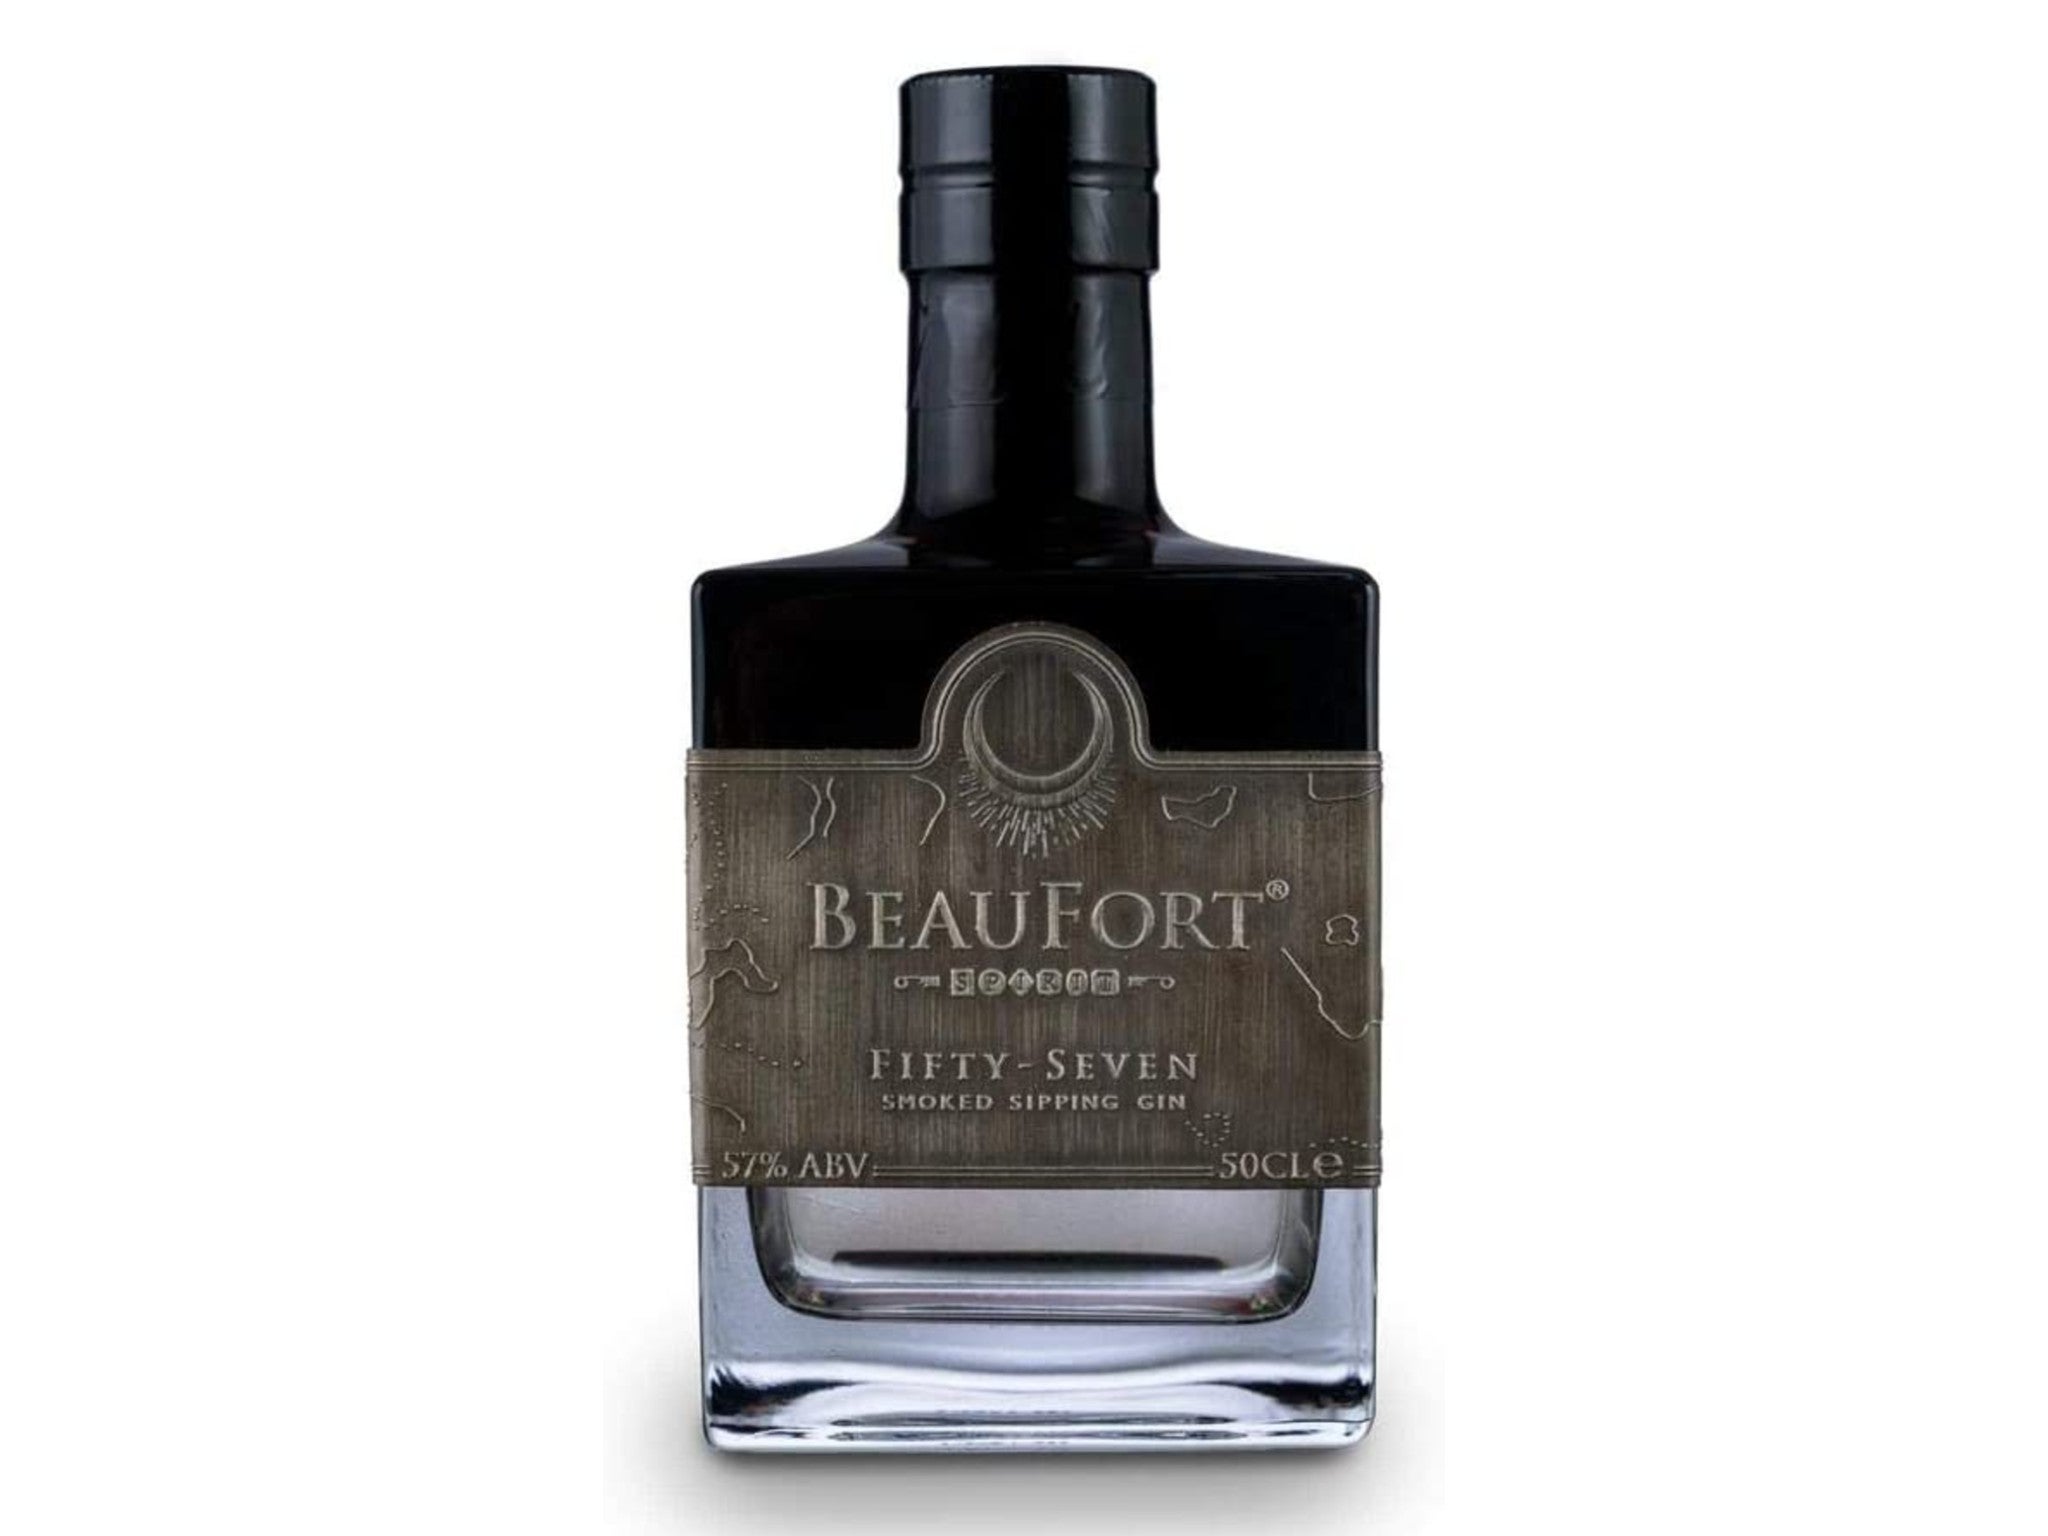 BeauFort fifty-seven smoked sipping gin, 50cl indybest.jpeg